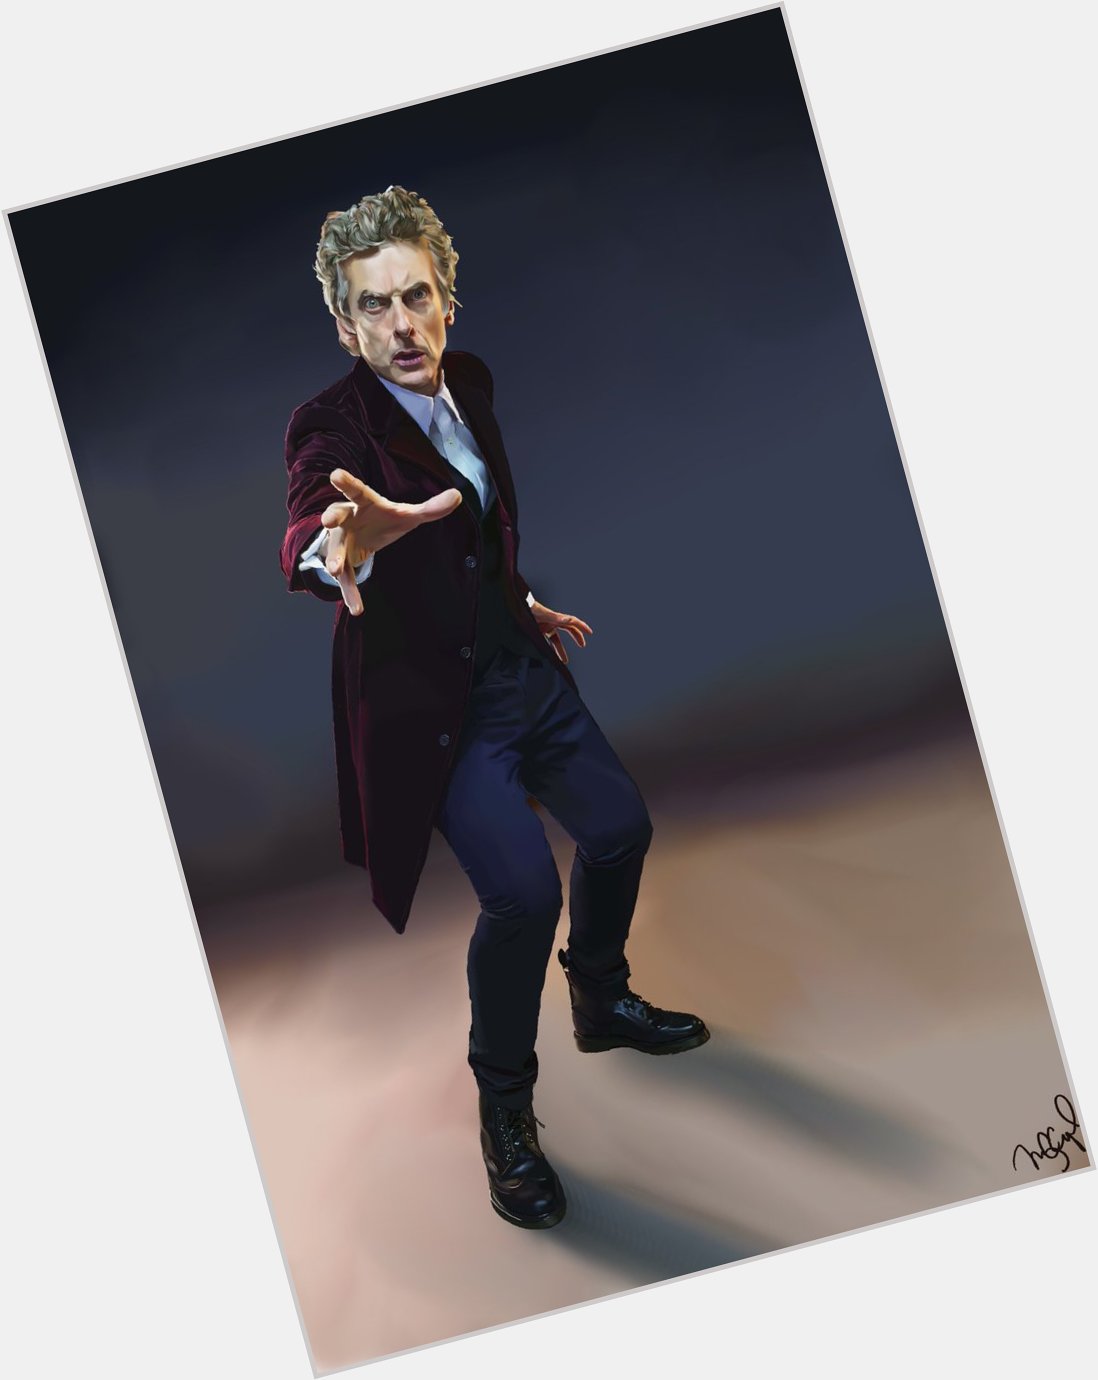  Happy Birthday, Peter Capaldi! A painting of you in your honor. 